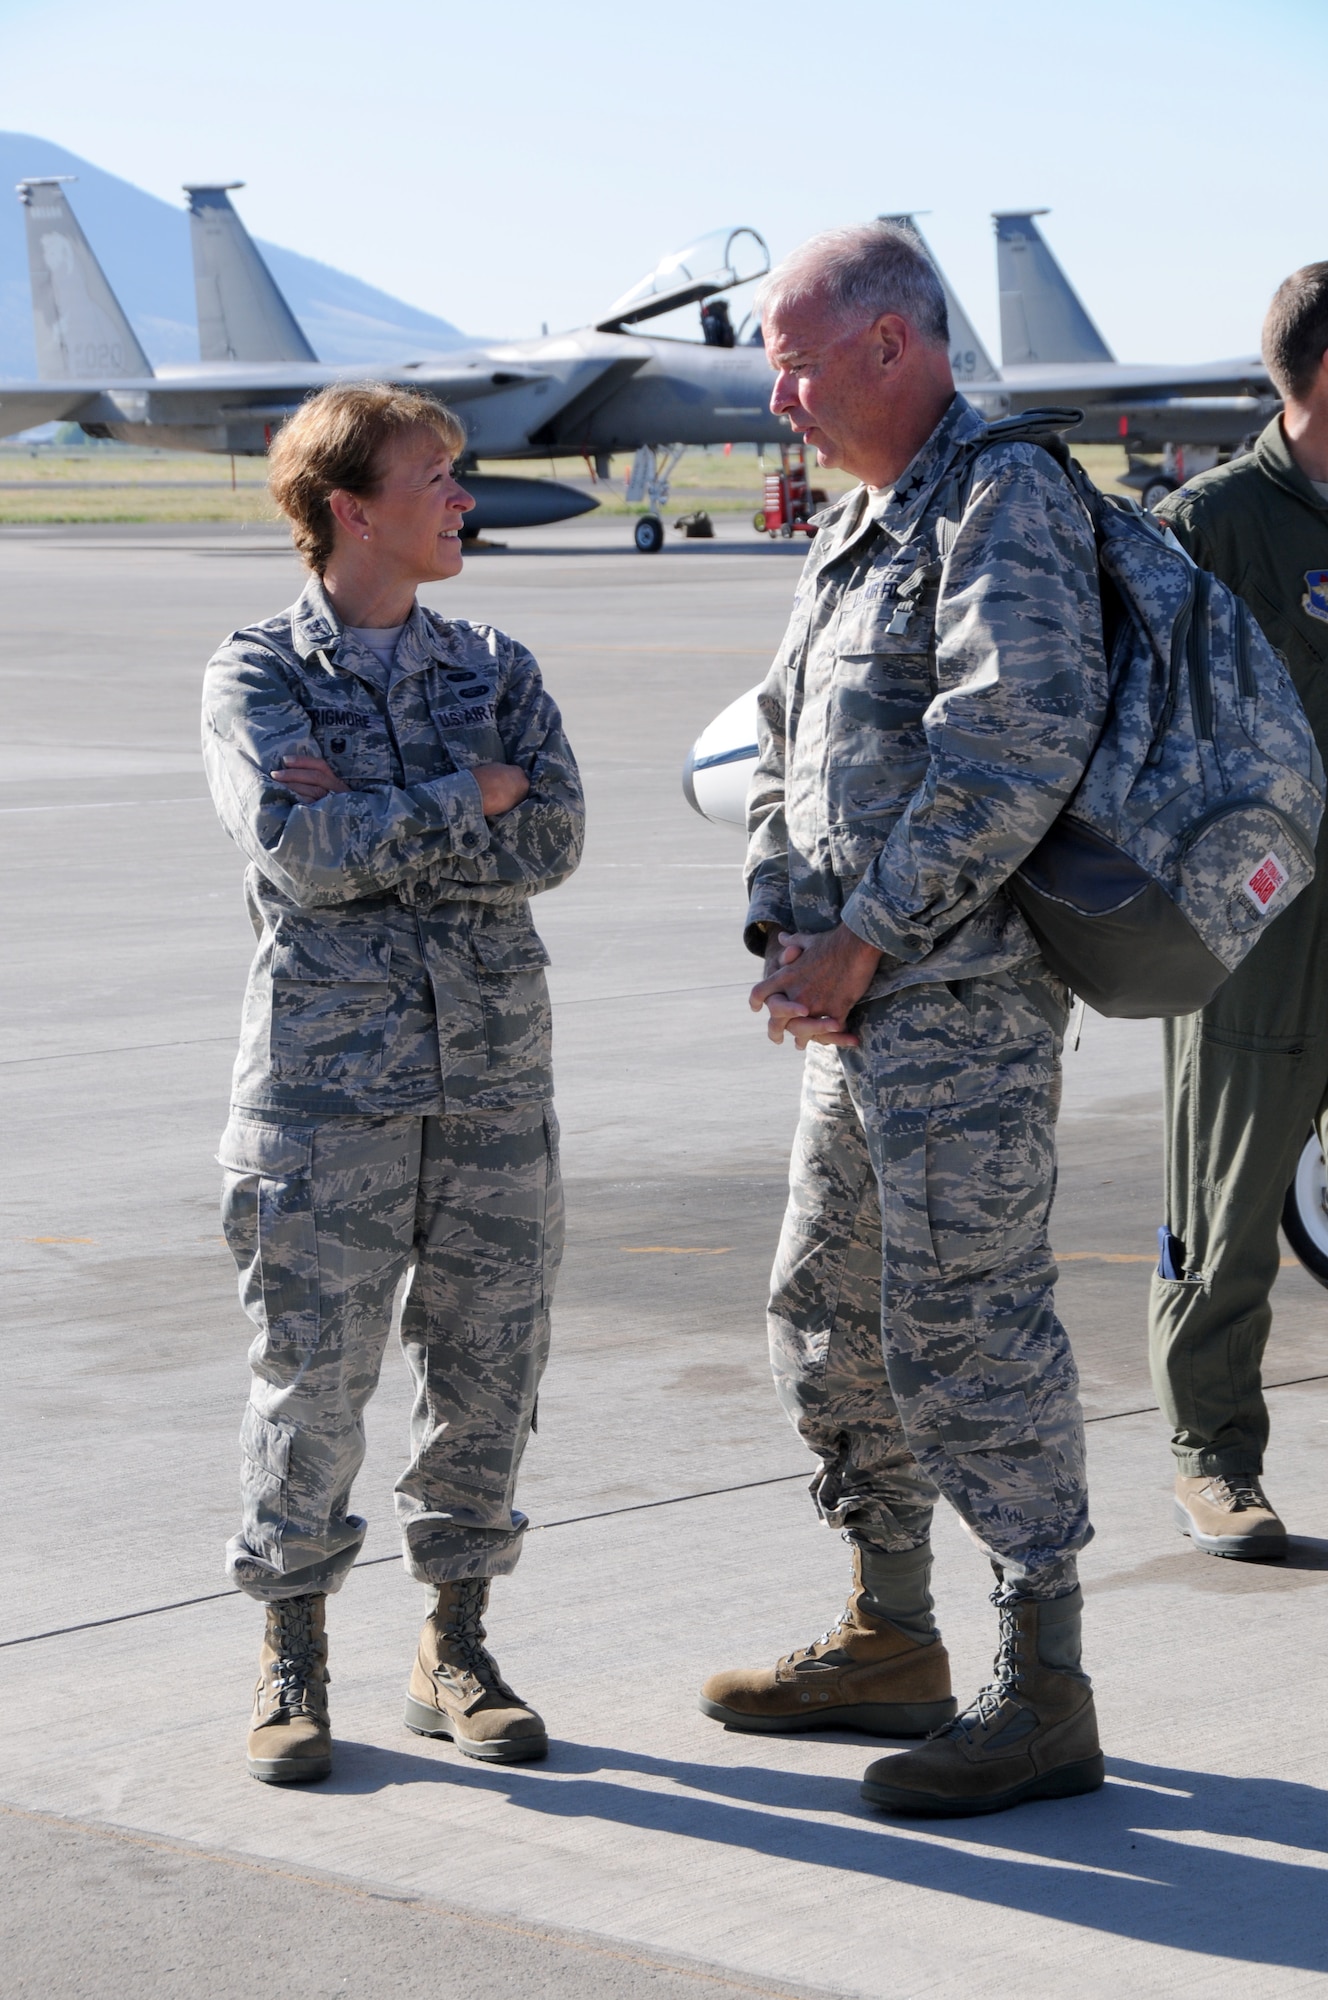 U.S. Air Force Maj. Gen. John McCoy, vice commander of Air Education and Training Command, is greeted by Col. Donna Prigmore, 173rd Fighter Wing vice commander, during his arrival to Kingsley Field, Ore., July 6, 2016. McCoy had a firsthand look at the unit's mission and capabilities, which includes training F-15C Eagle fighter pilots. (U.S. Air National Guard photo by Staff Sgt. Penny Snoozy) 